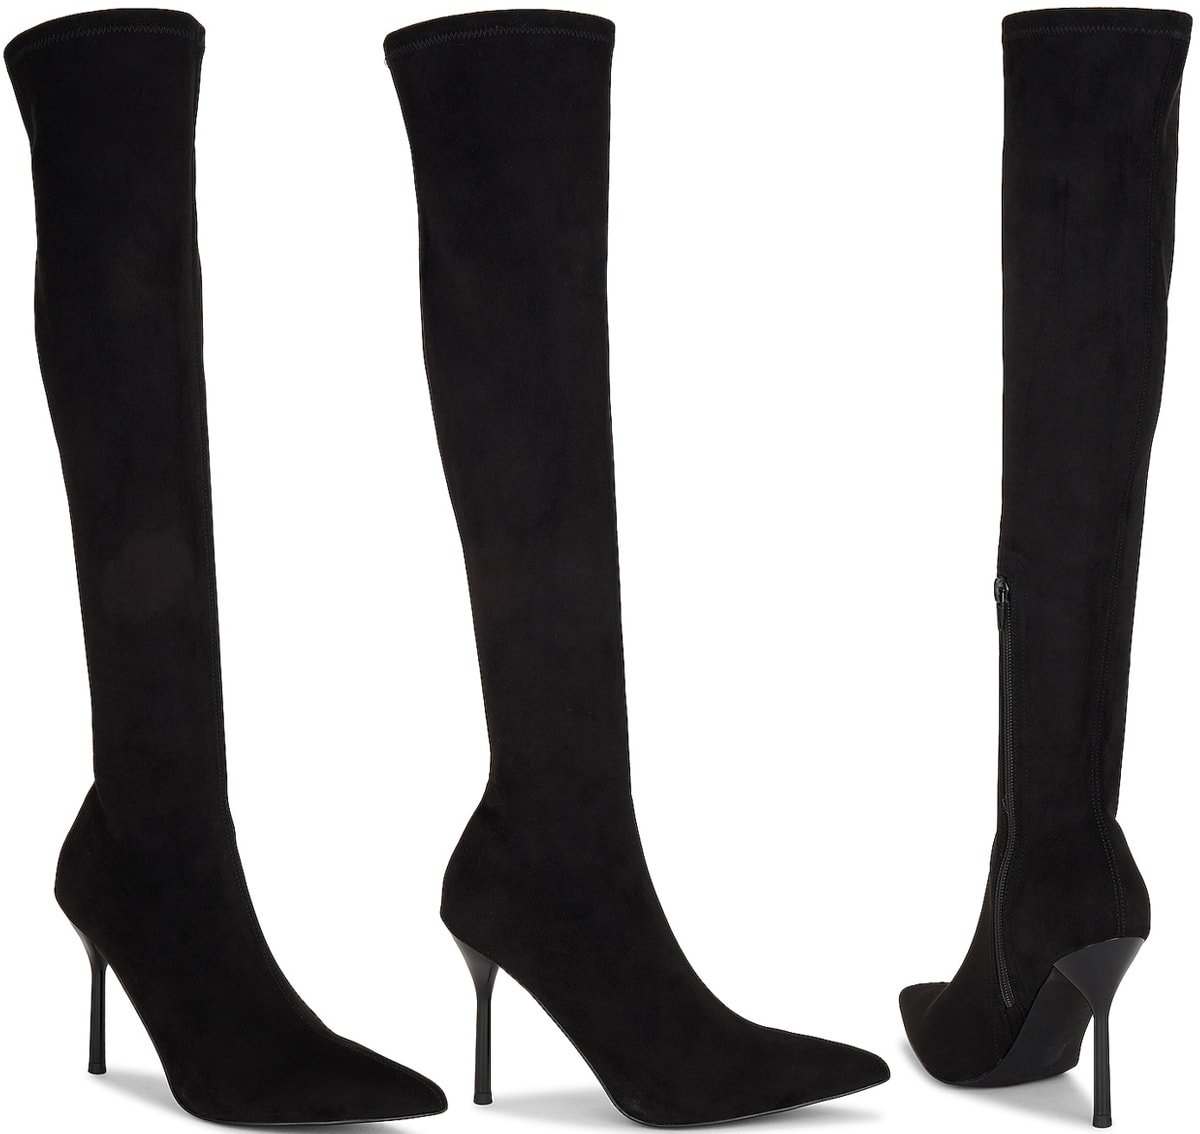 Jeffrey Campbell's Operate thigh-high boots are crafted from faux suede and feature pointed toes and stiletto heels